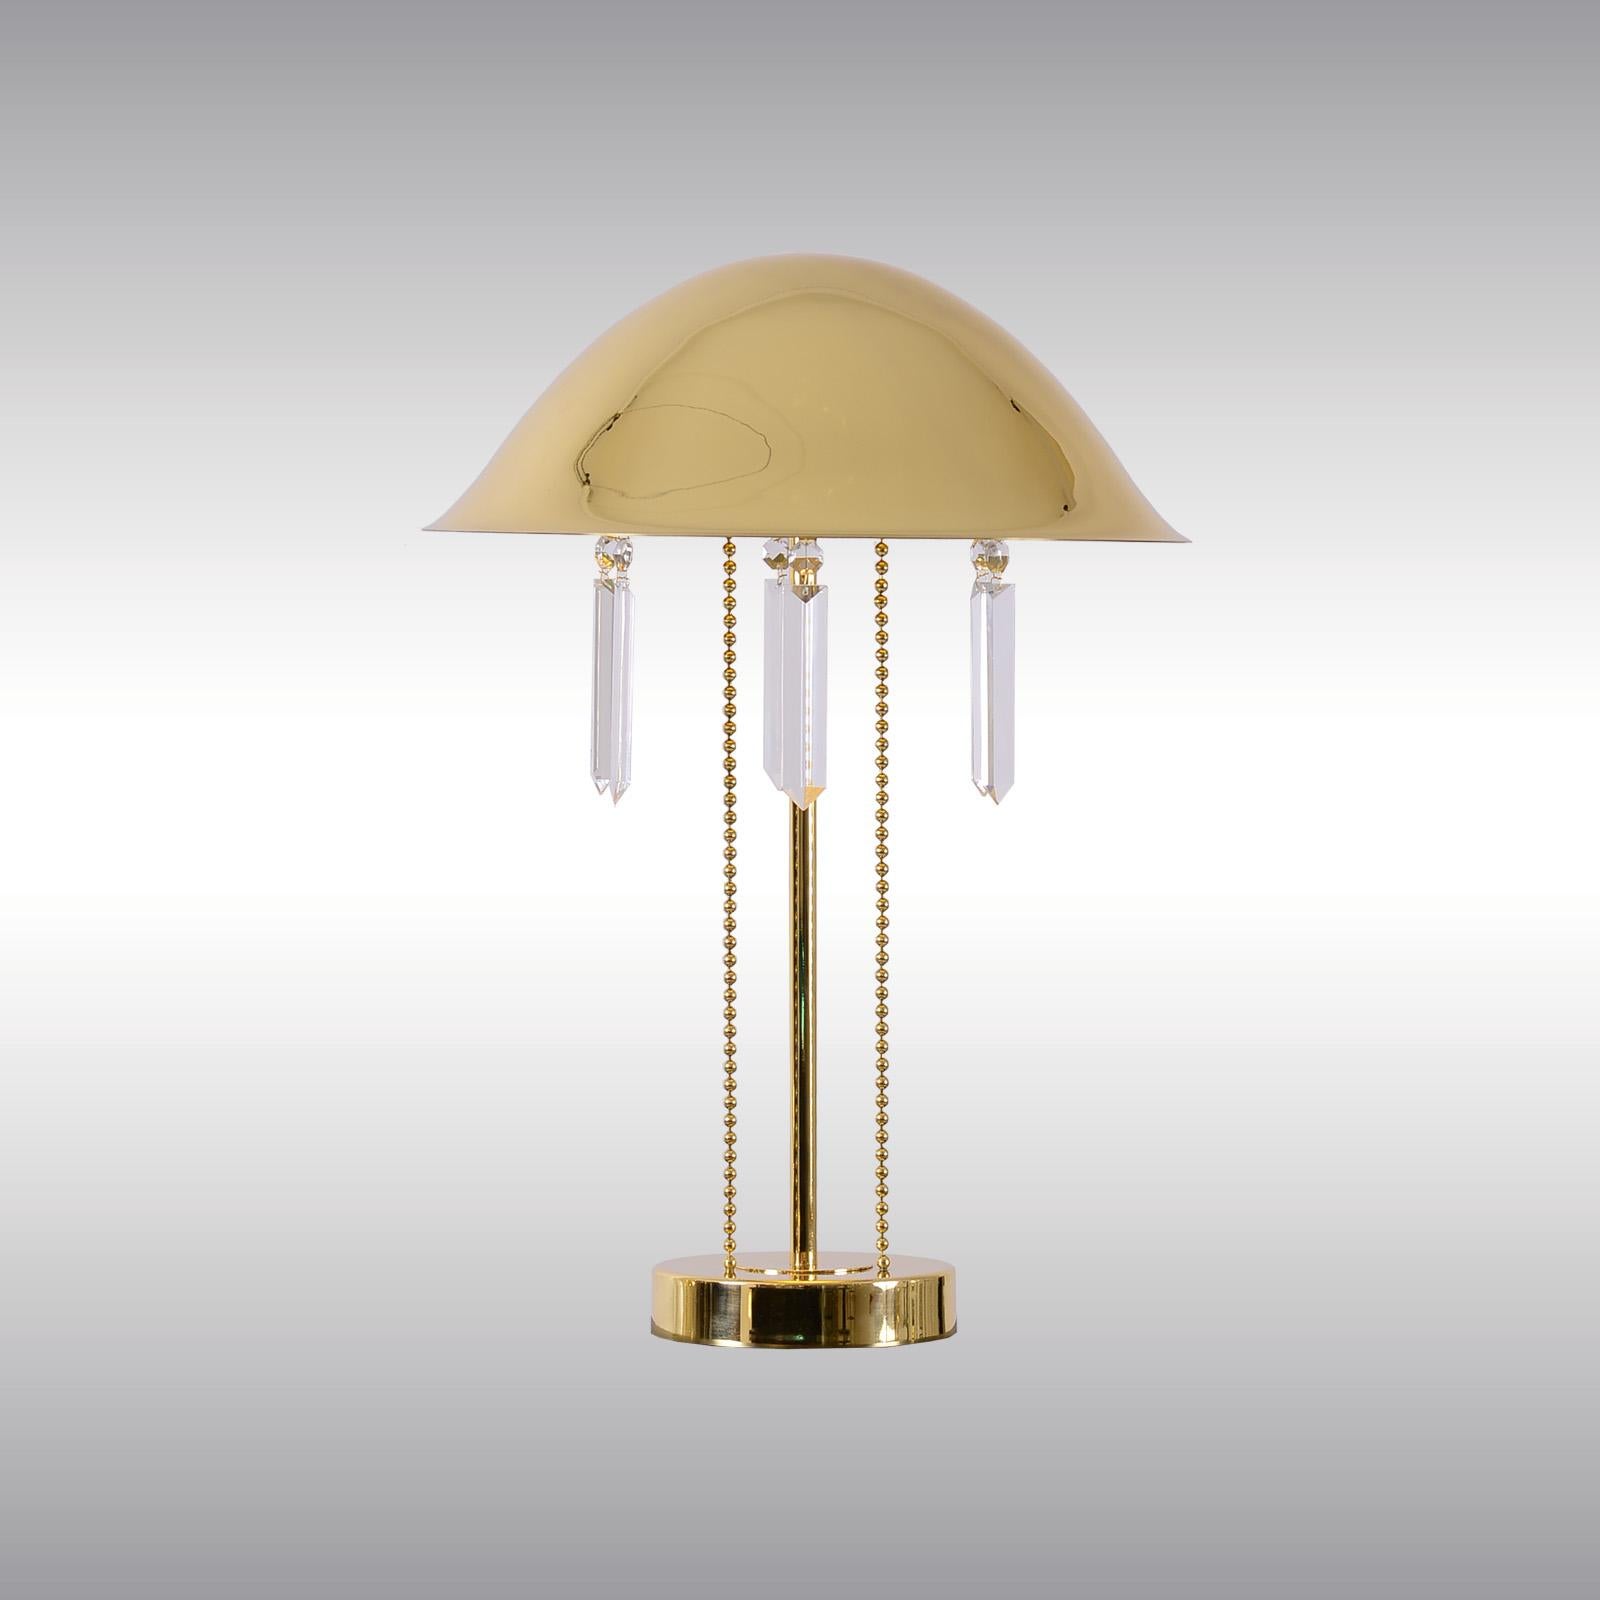 According to the famous pendant-lamp for the dining room and the entrance hall at the Purkersdorf Sanatorium designed by Josef Hoffmann in 1903, this table lamp matches perfectly.

Most components according to the UL regulations, with an additional